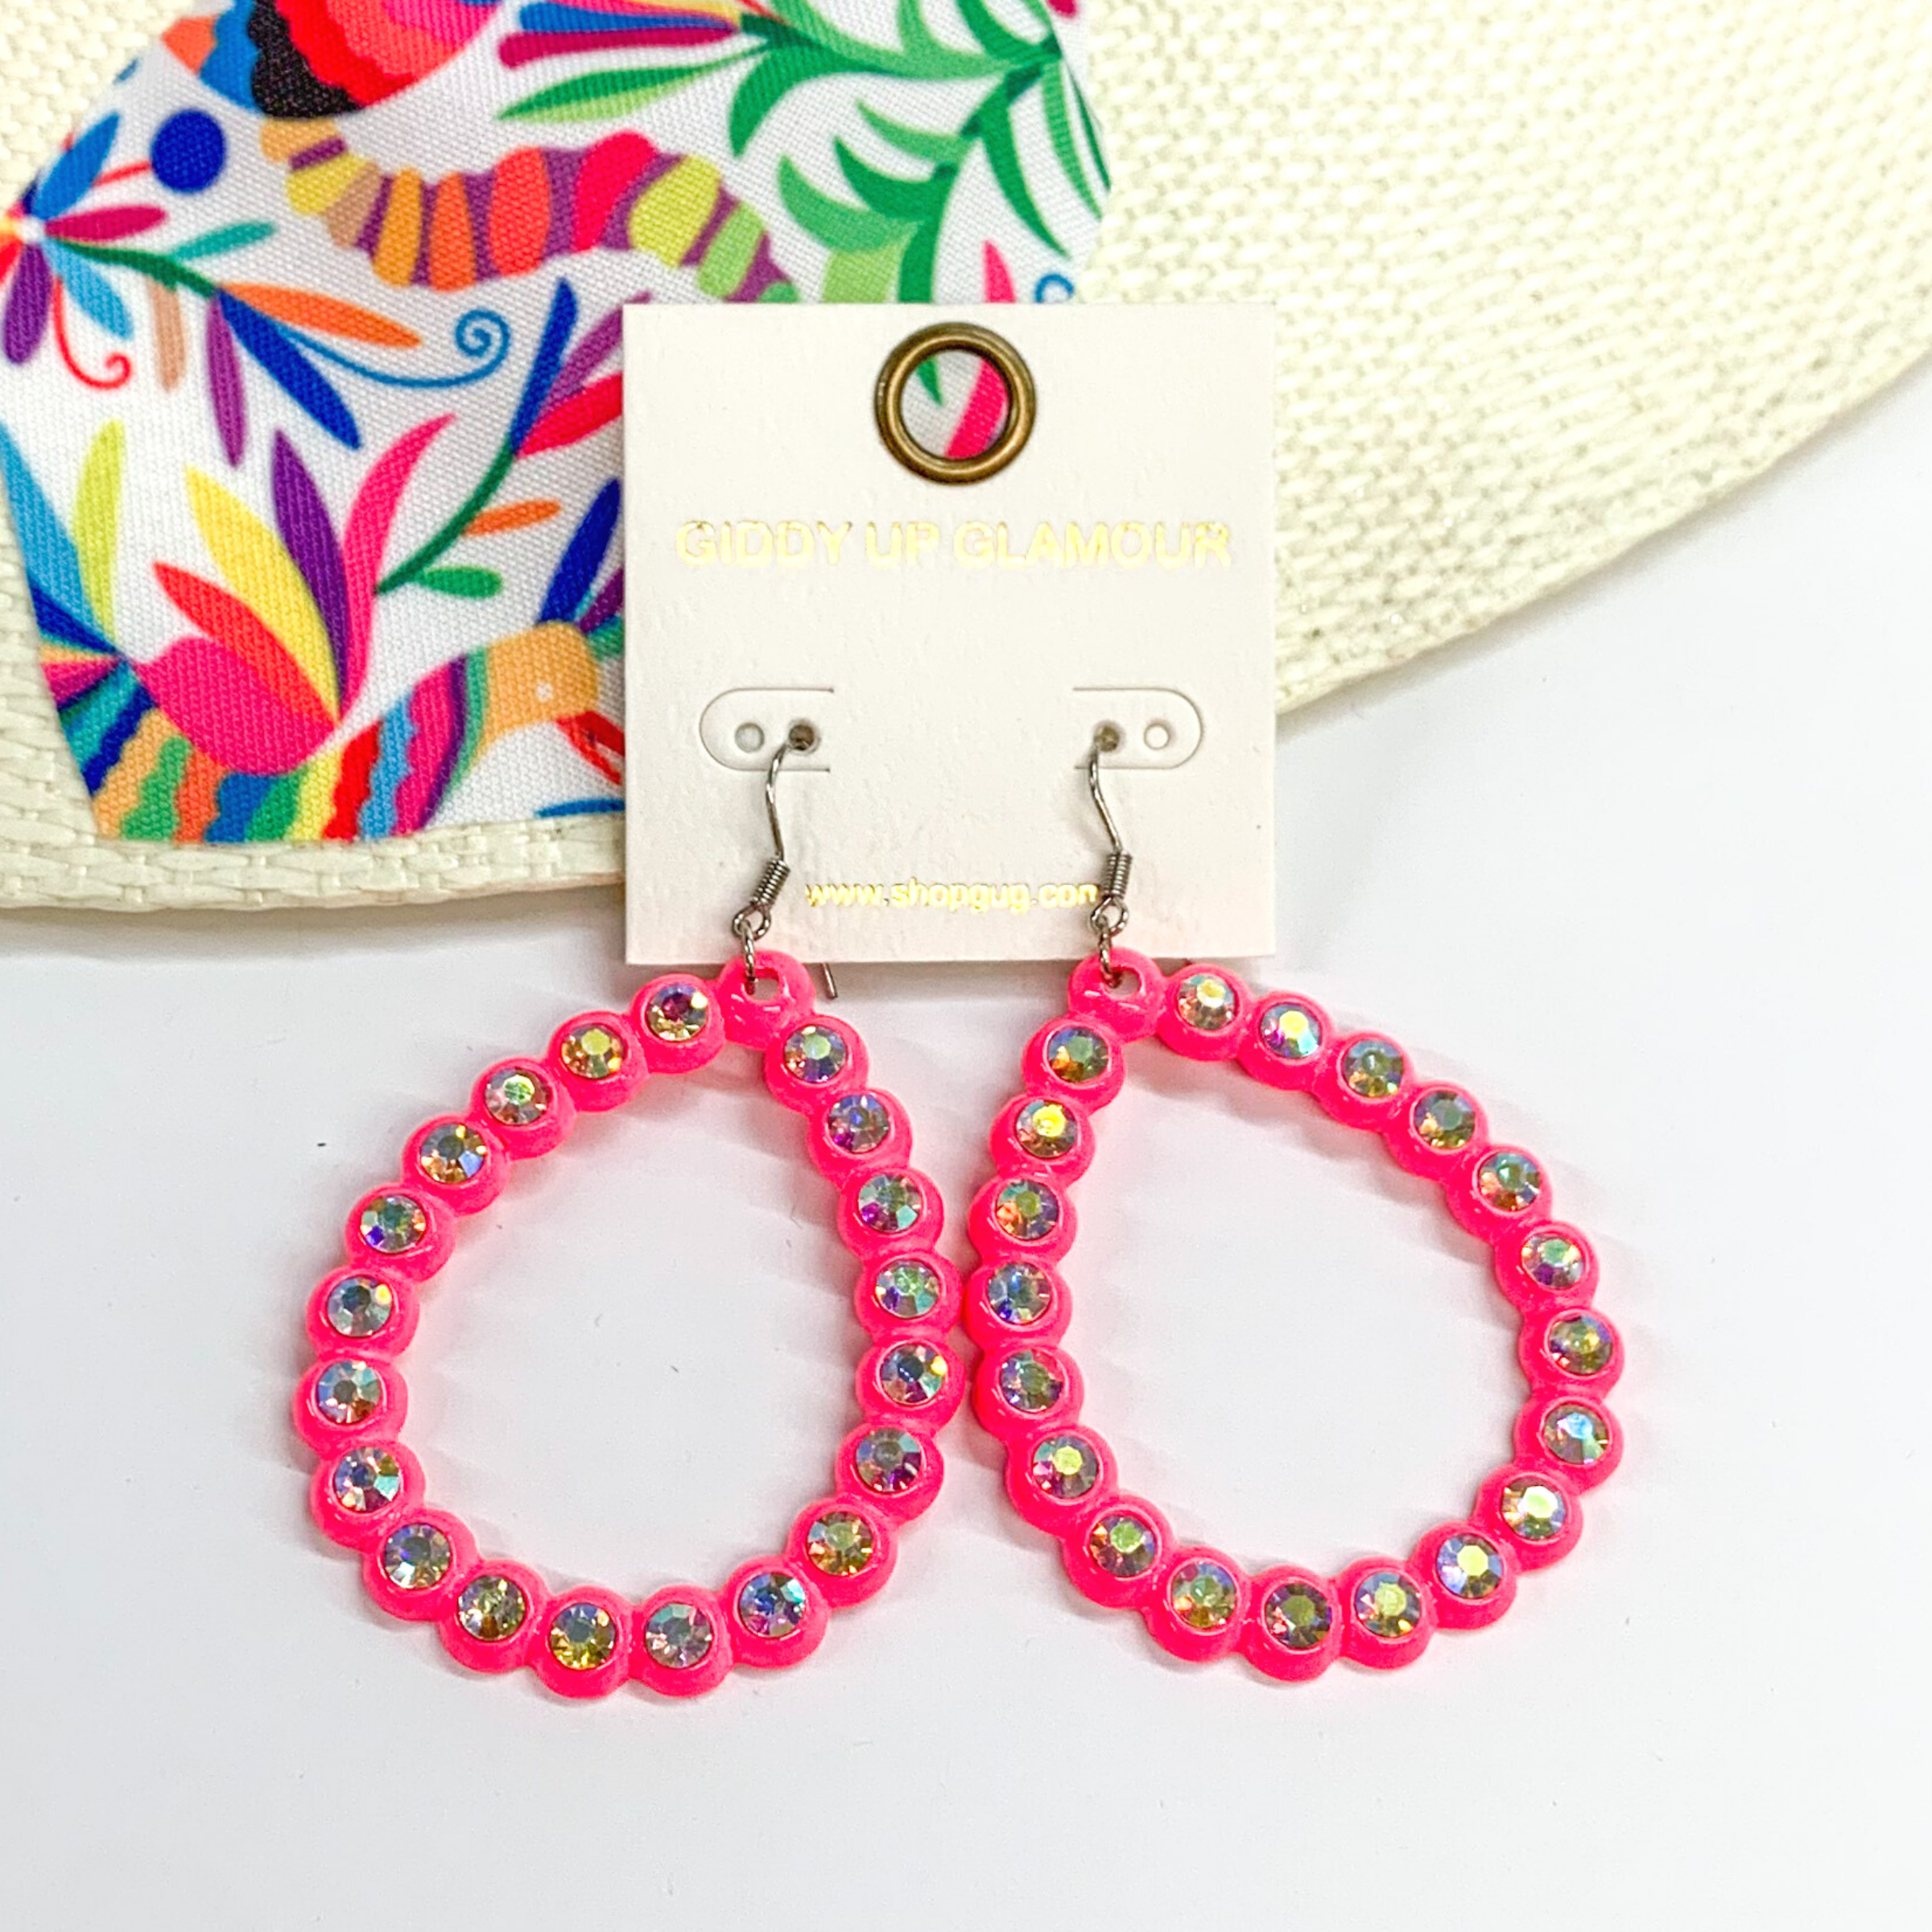 Neon pink, open teardrop earrings with ab crystal outline. These earrings are pictured on a white background with a colorful piece of fabric behind them.